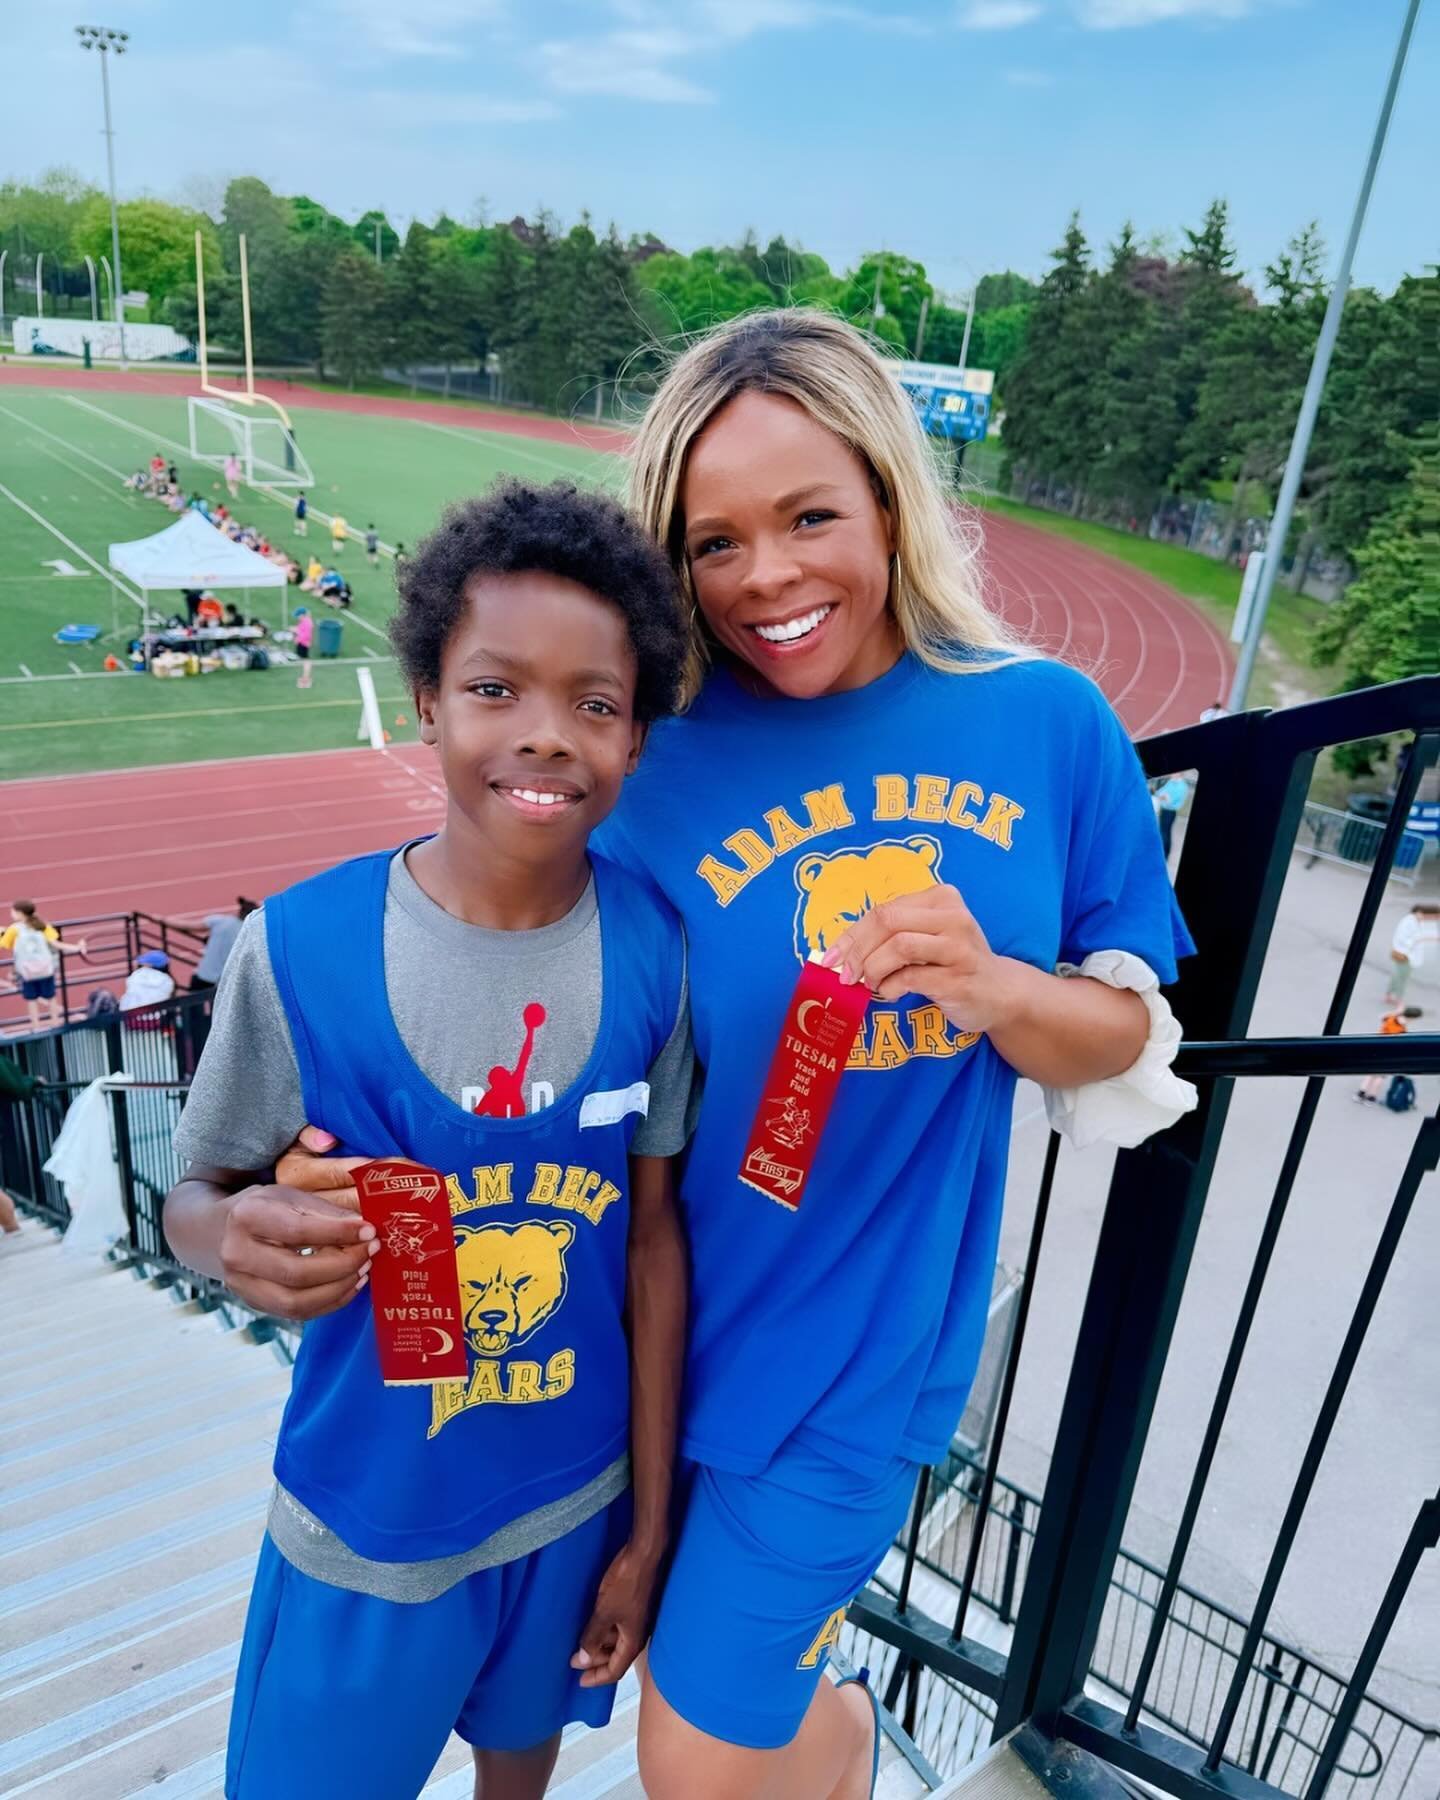 First place in both his events!!! 🗣️🥇🥇I&rsquo;m so proud!!!! And he handed me a ribbon to hold 🥹🙏❤️

Brings me back to my track days! Ughhh I love it so much ❤️‼️

#gobemigo